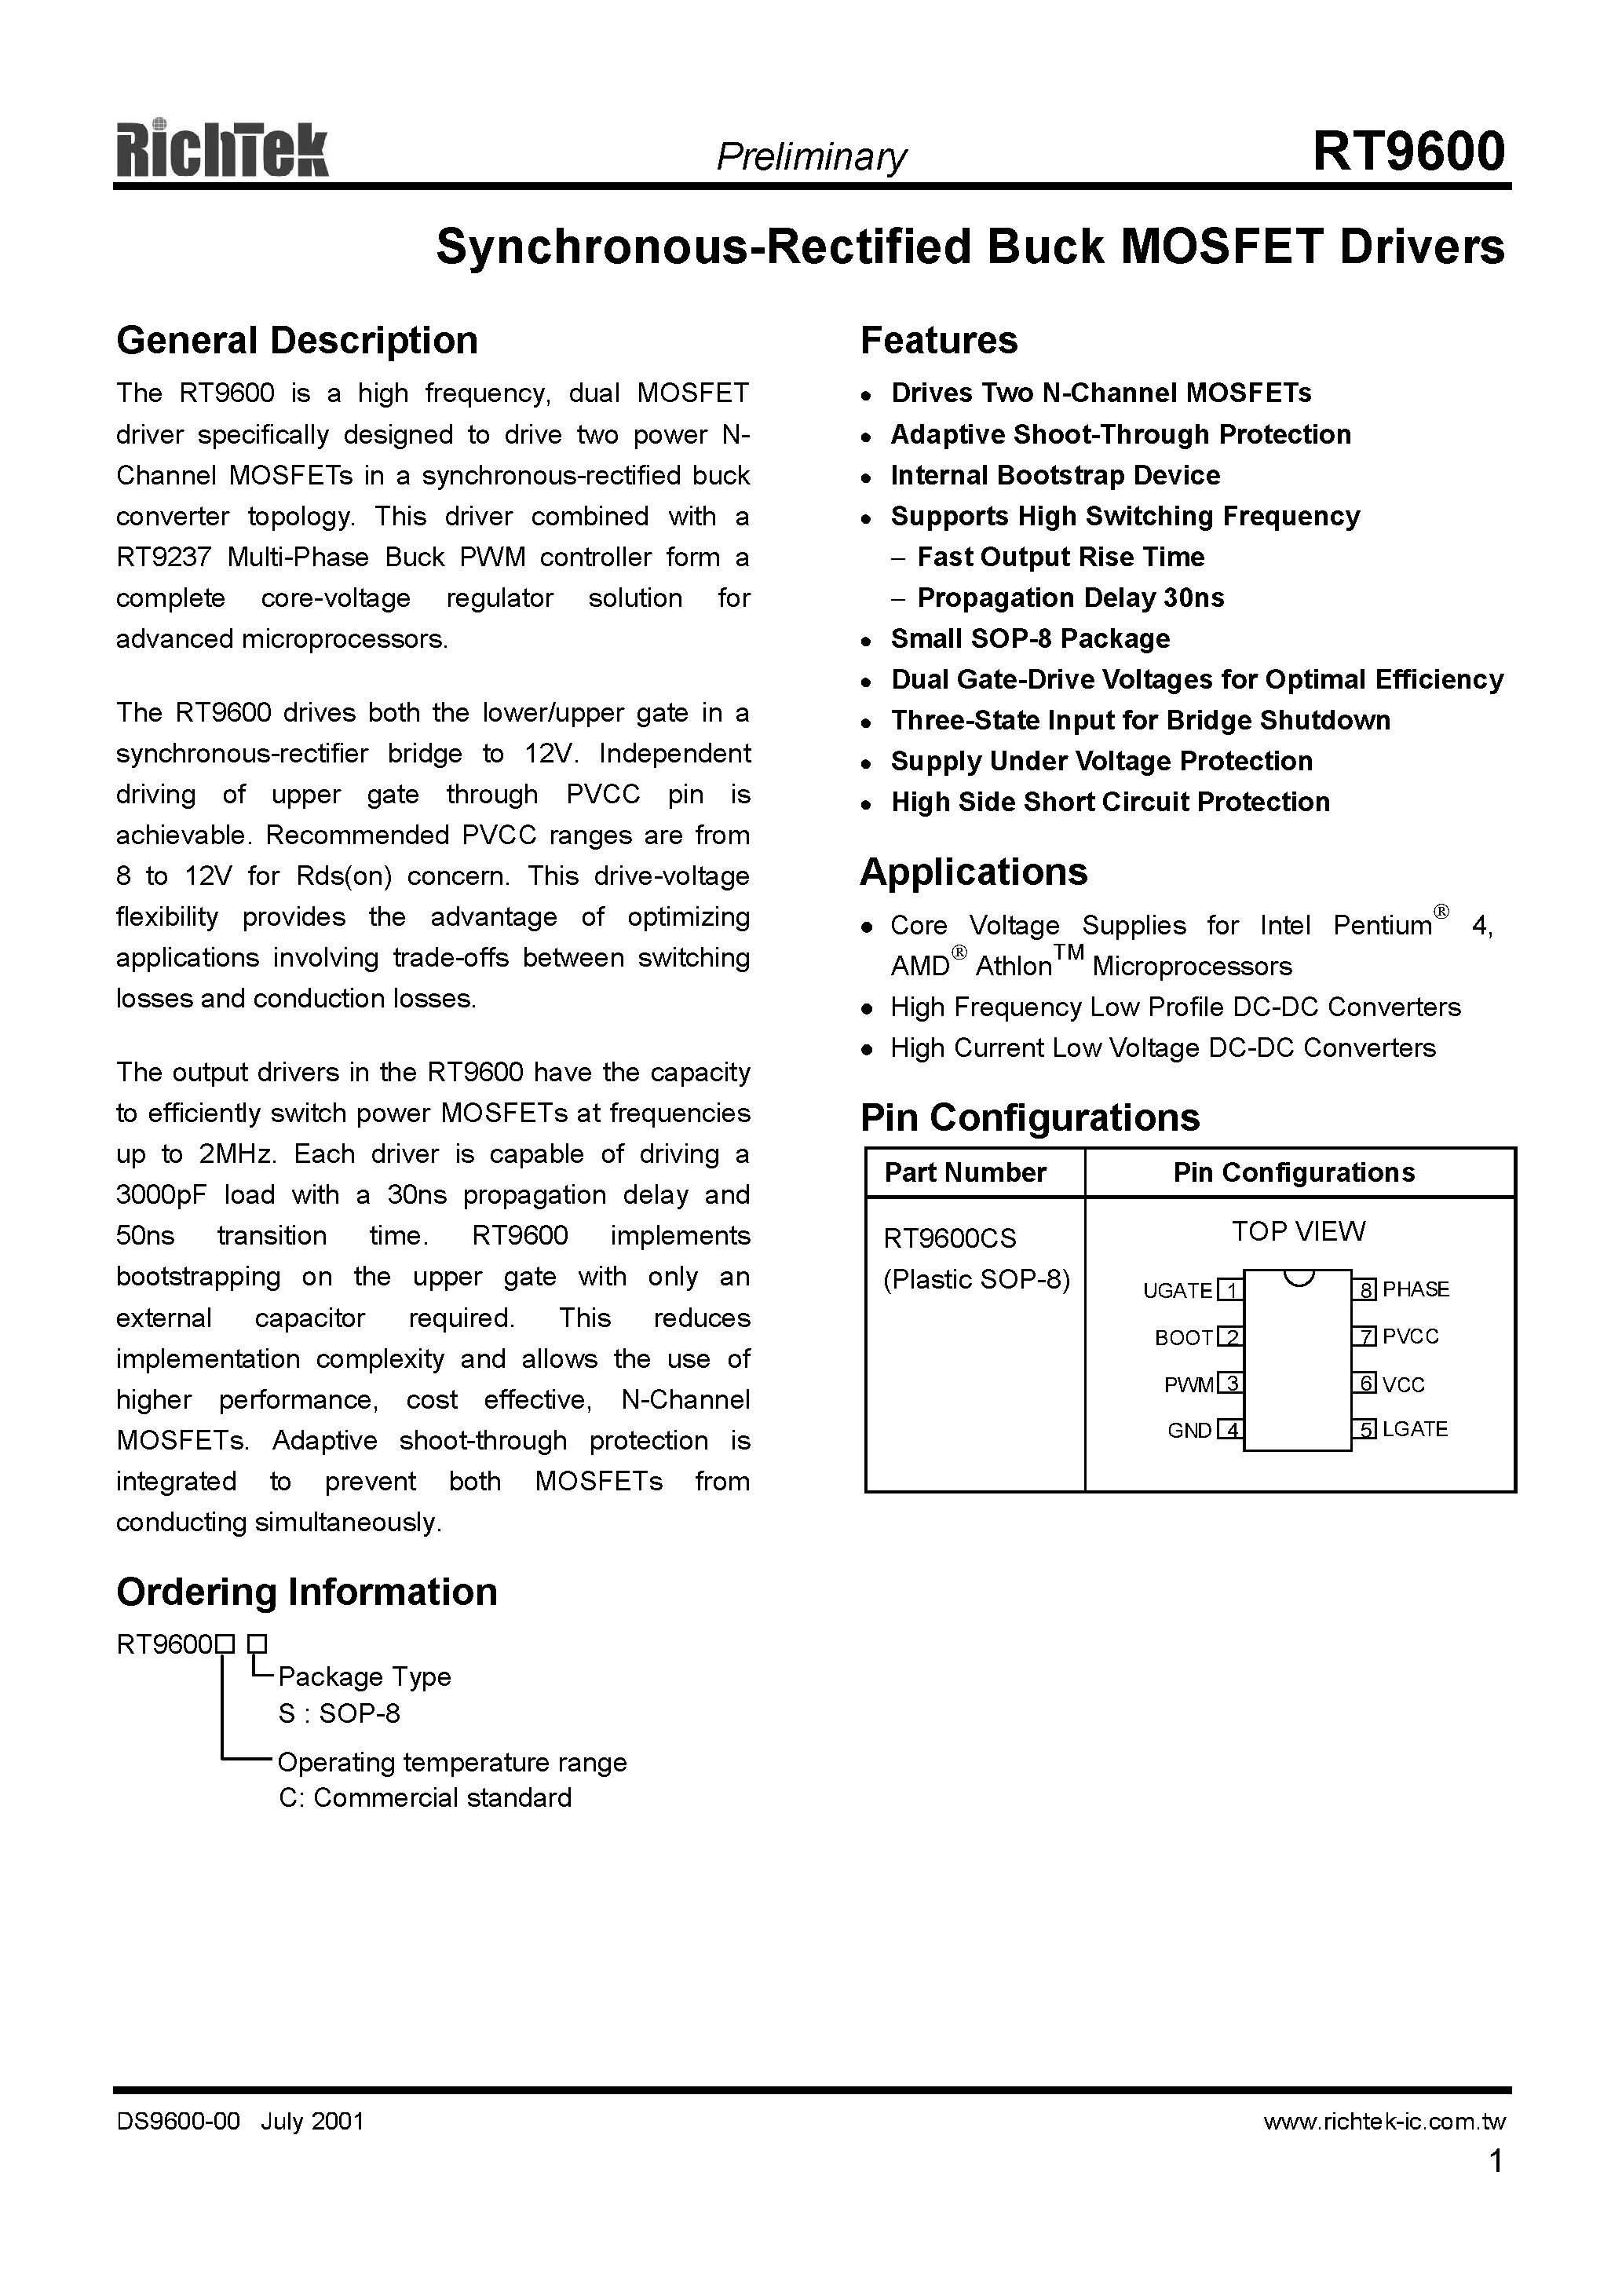 Datasheet RT9600CS - SYNCHRONOUS-RECTIFIED BUCK MOSFET DRIVERS page 1